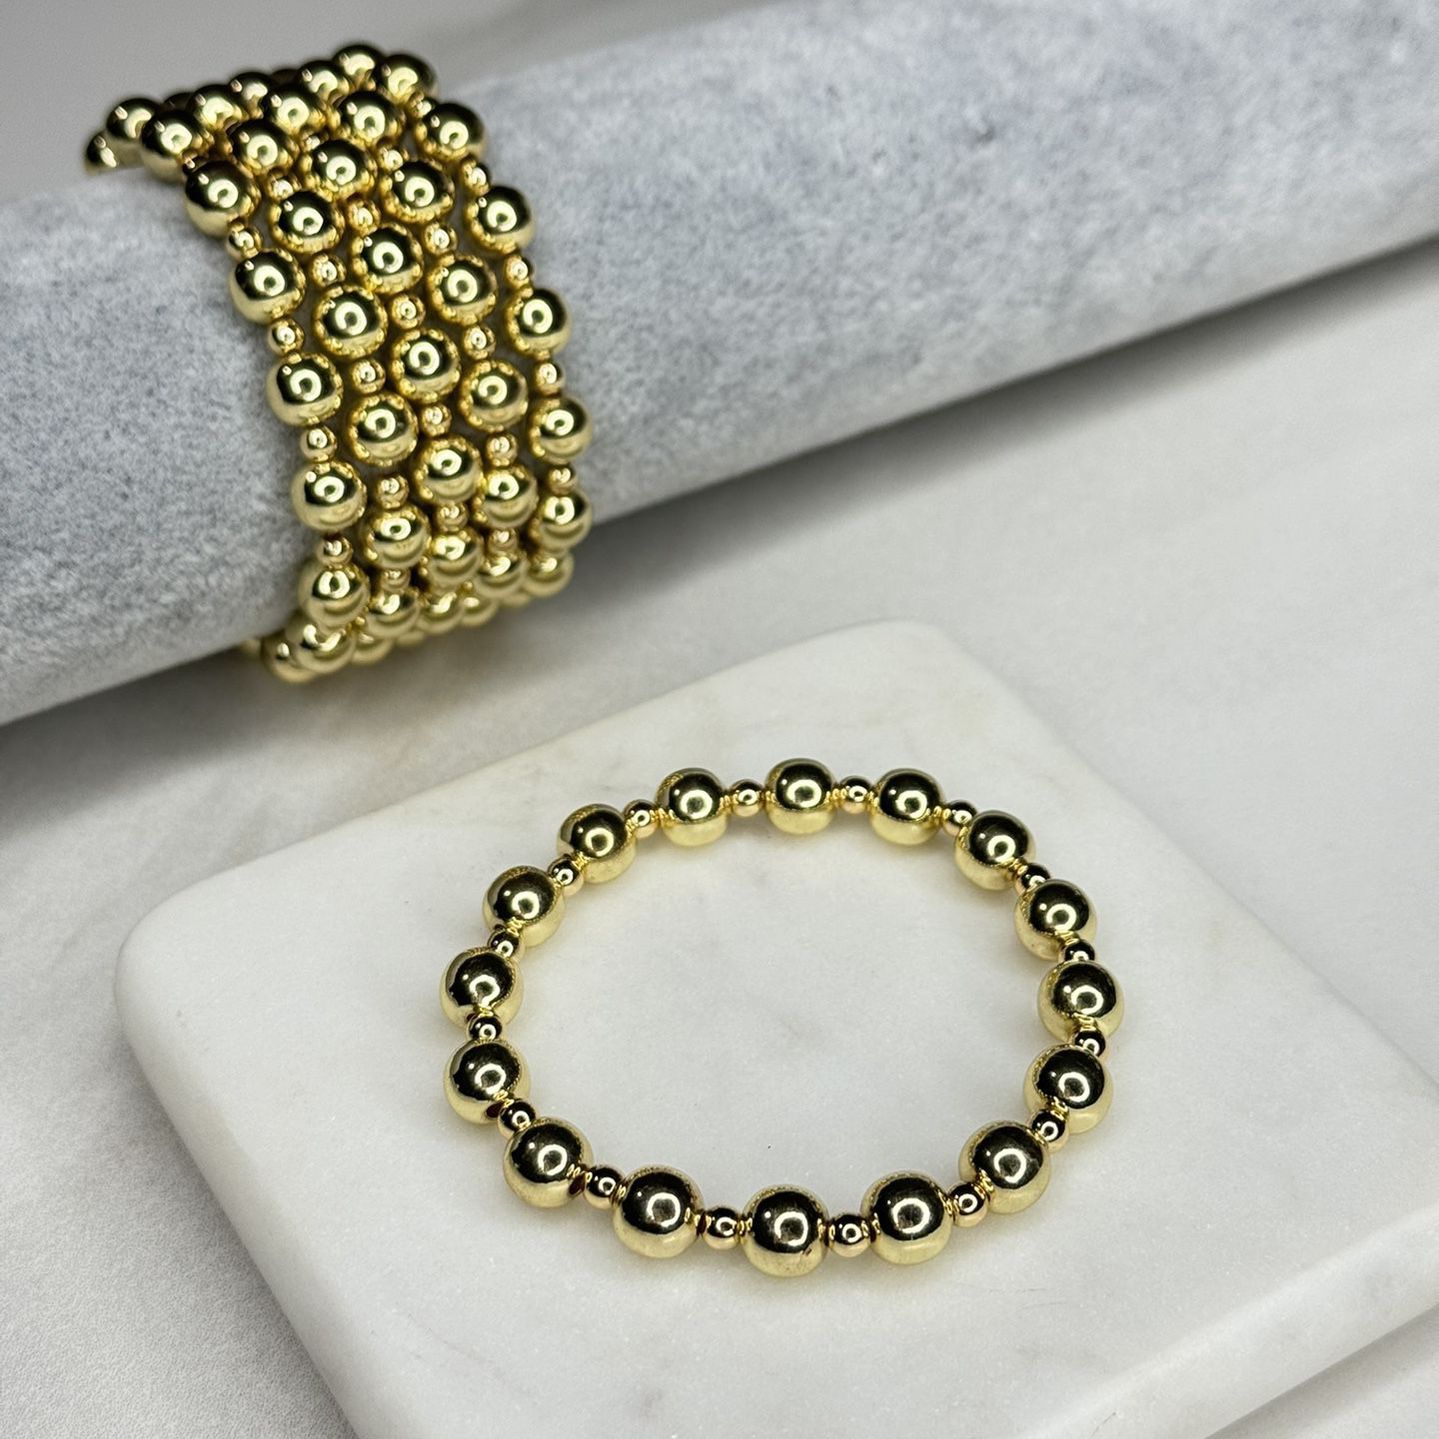 Fashion Statement Modern Bracelet BALINES GOLD for Women and Teen Girls. Vacation, Summer Accessories and Gift Ideas with Gold and Silver Jewelry.